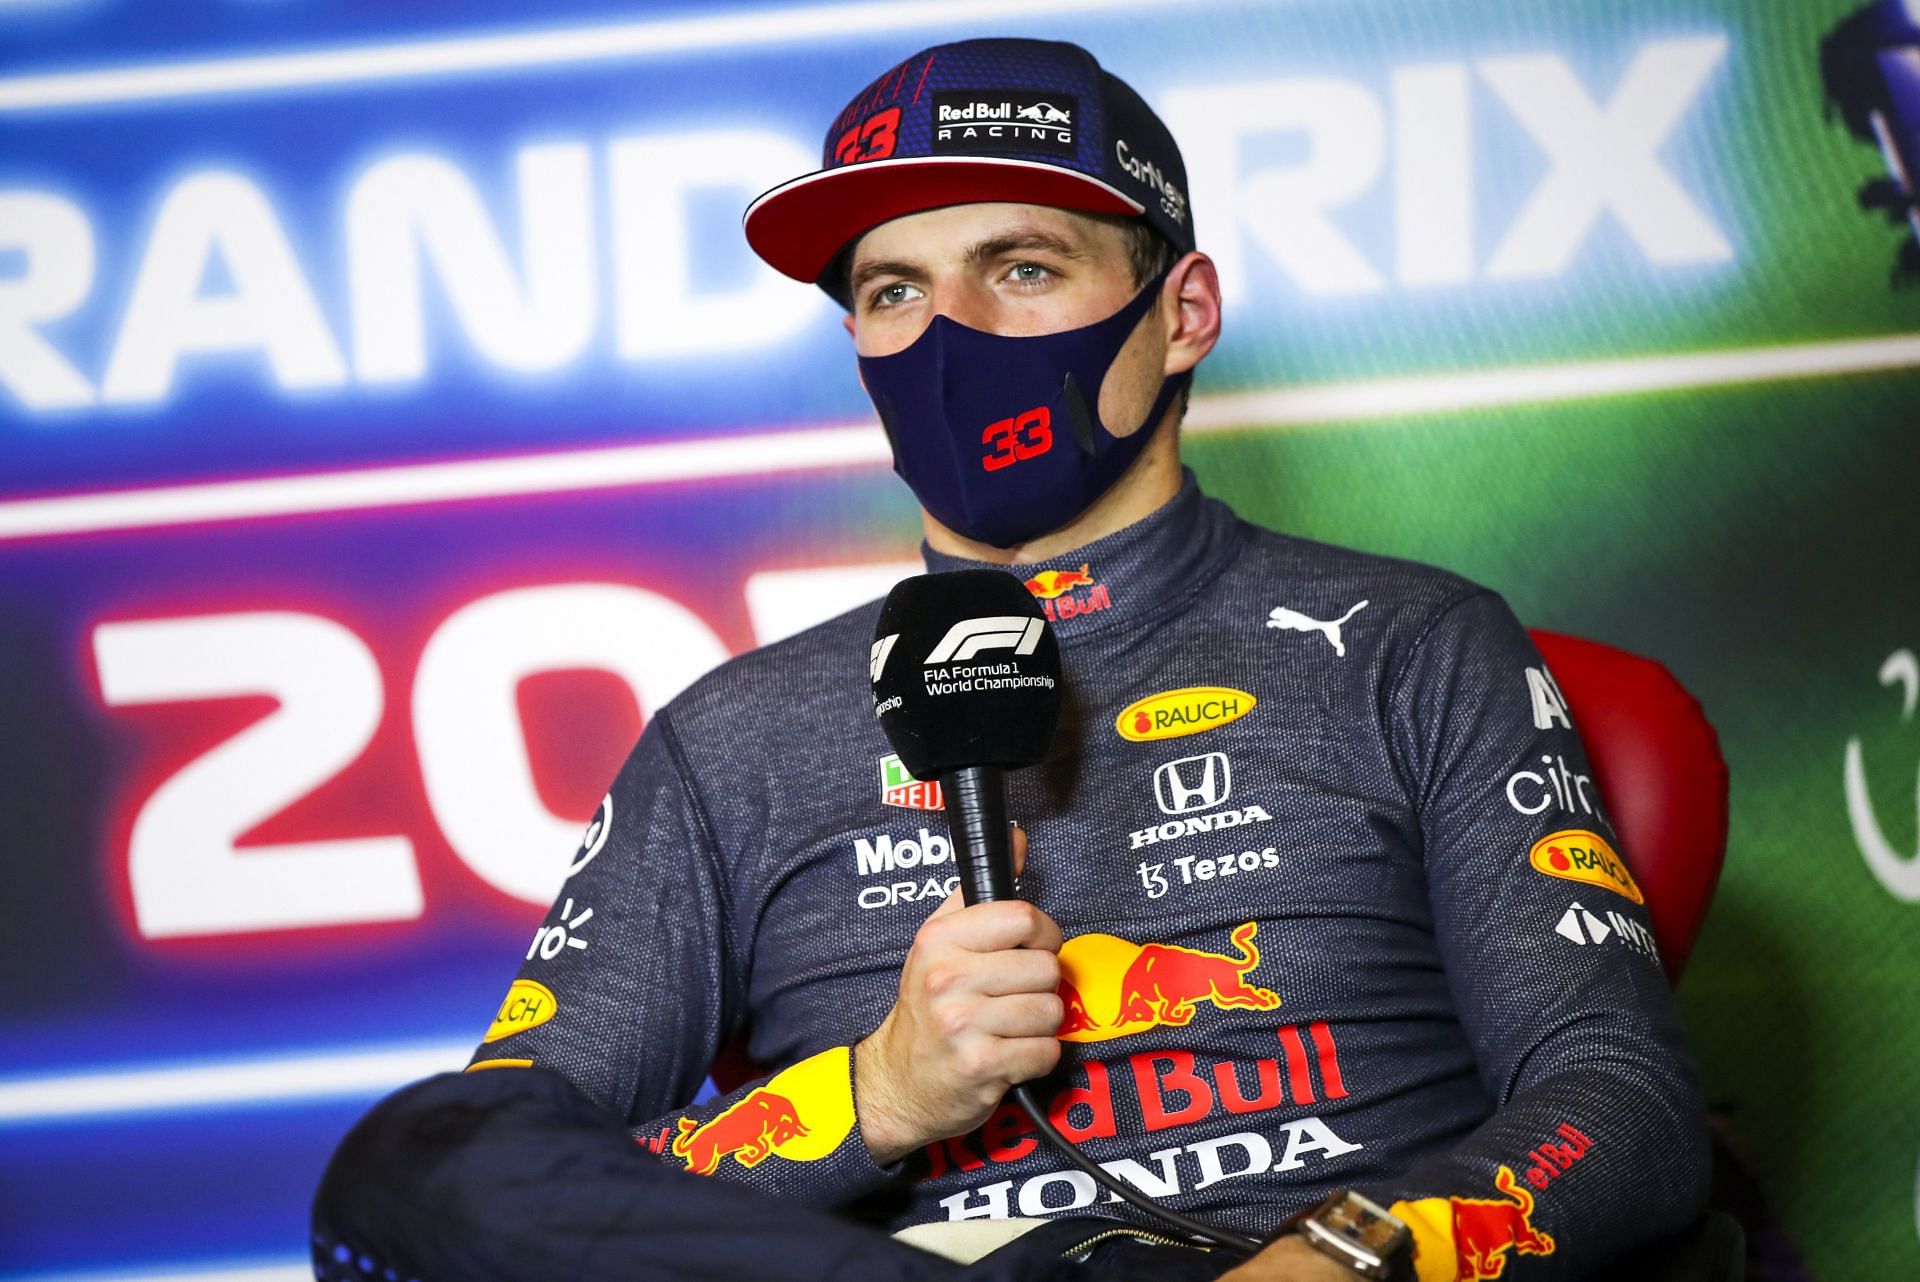 Max Verstappen explains his qualifying debacle at the FIA Press conference ahead of the 2021 Saudi Arabian Grand Prix. (Photo by Florent Gooden - Pool/Getty Images)